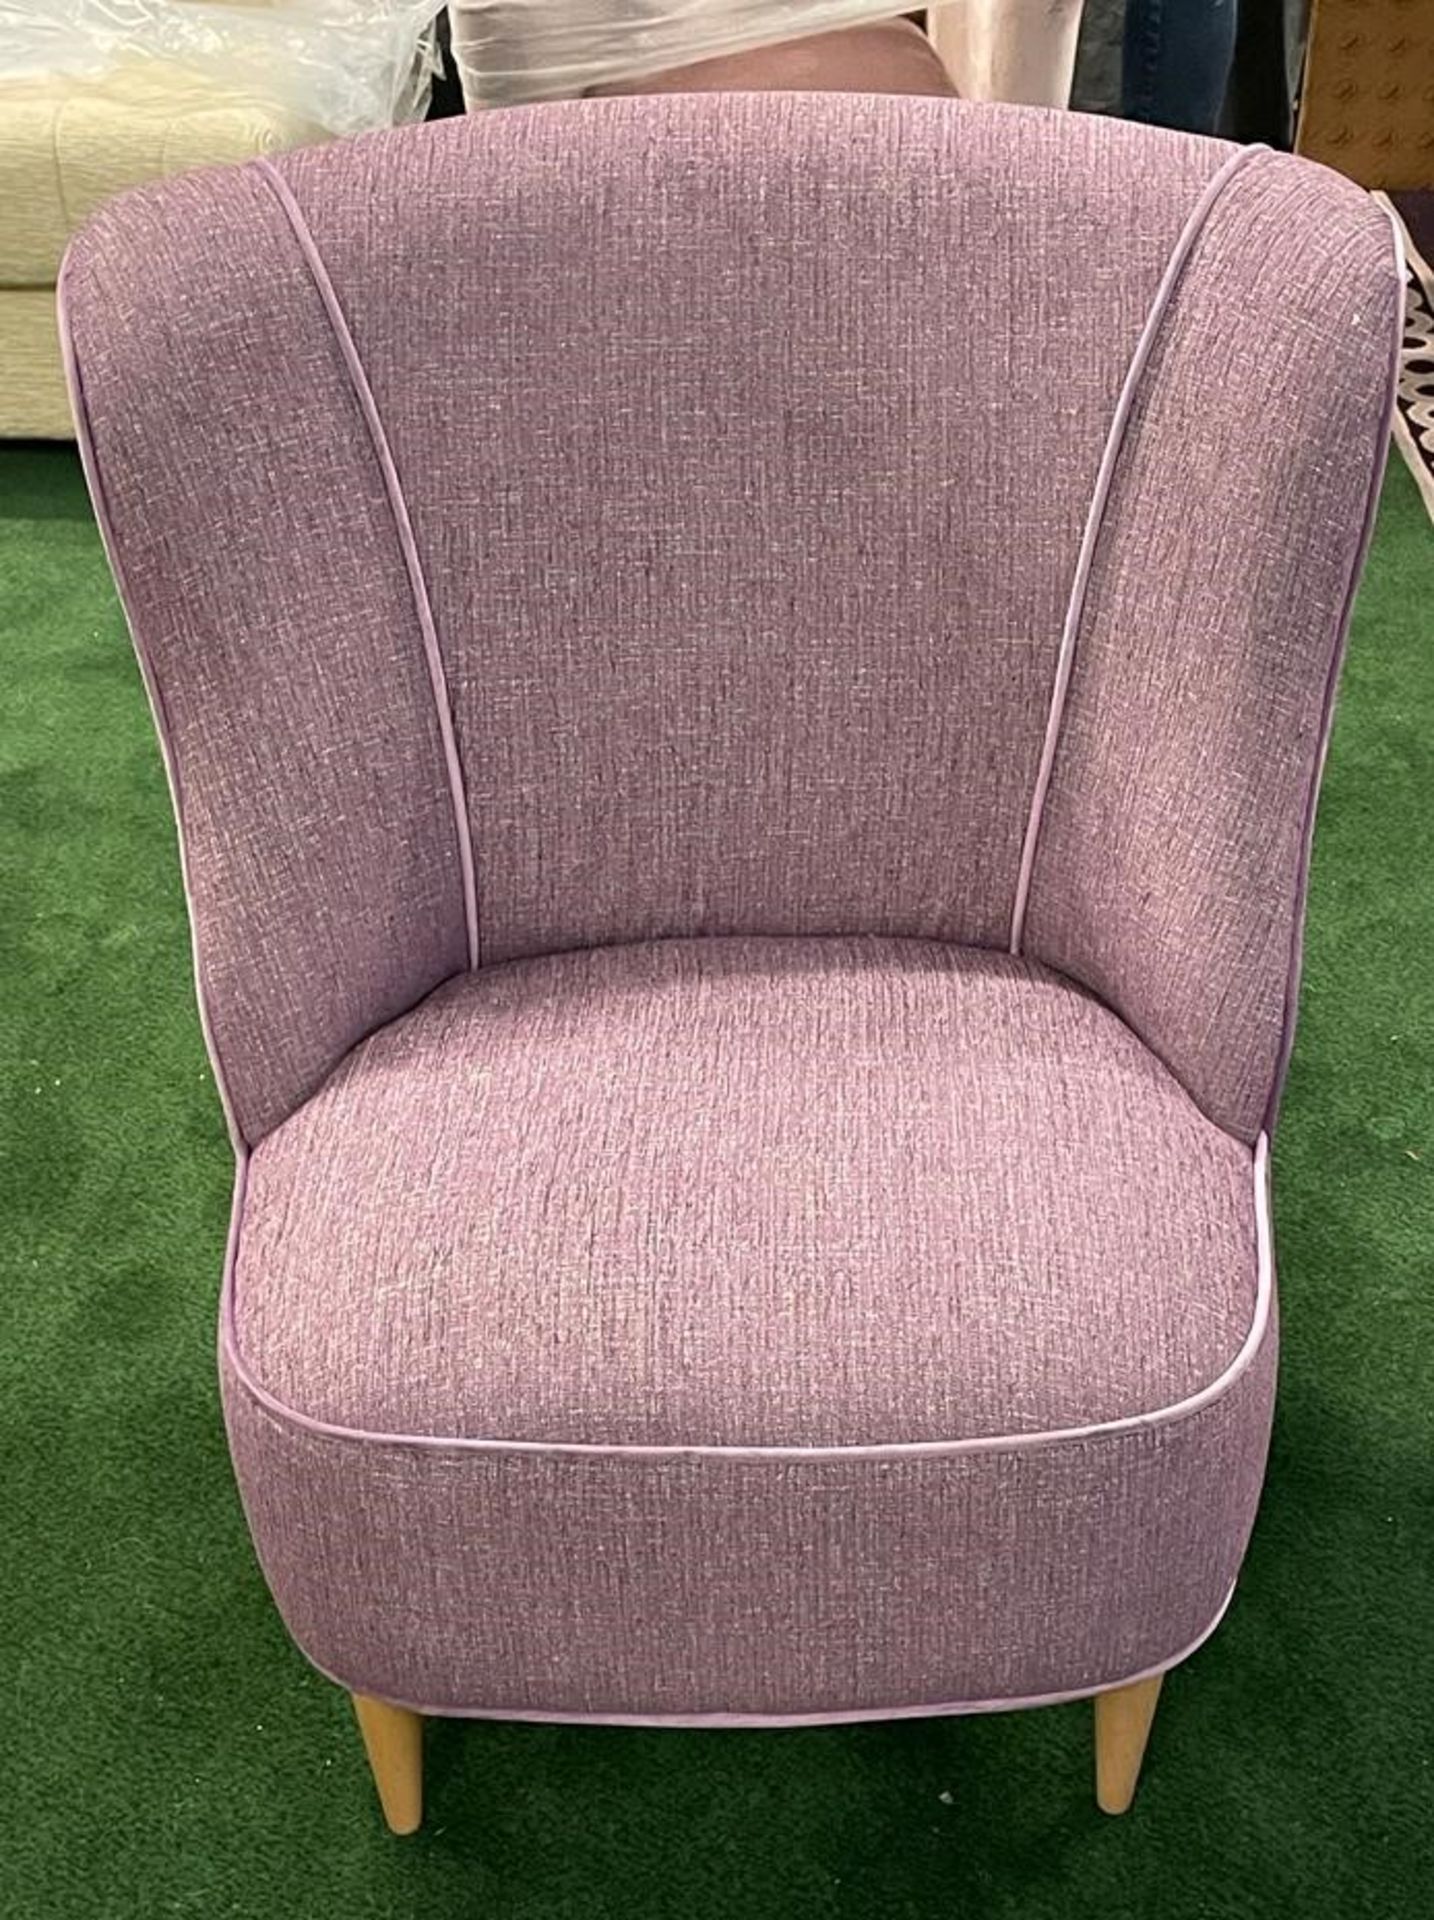 Lilac Chair With Wooden Legs 48 (P) 68 x (W) x 83 (H) (Chair11)